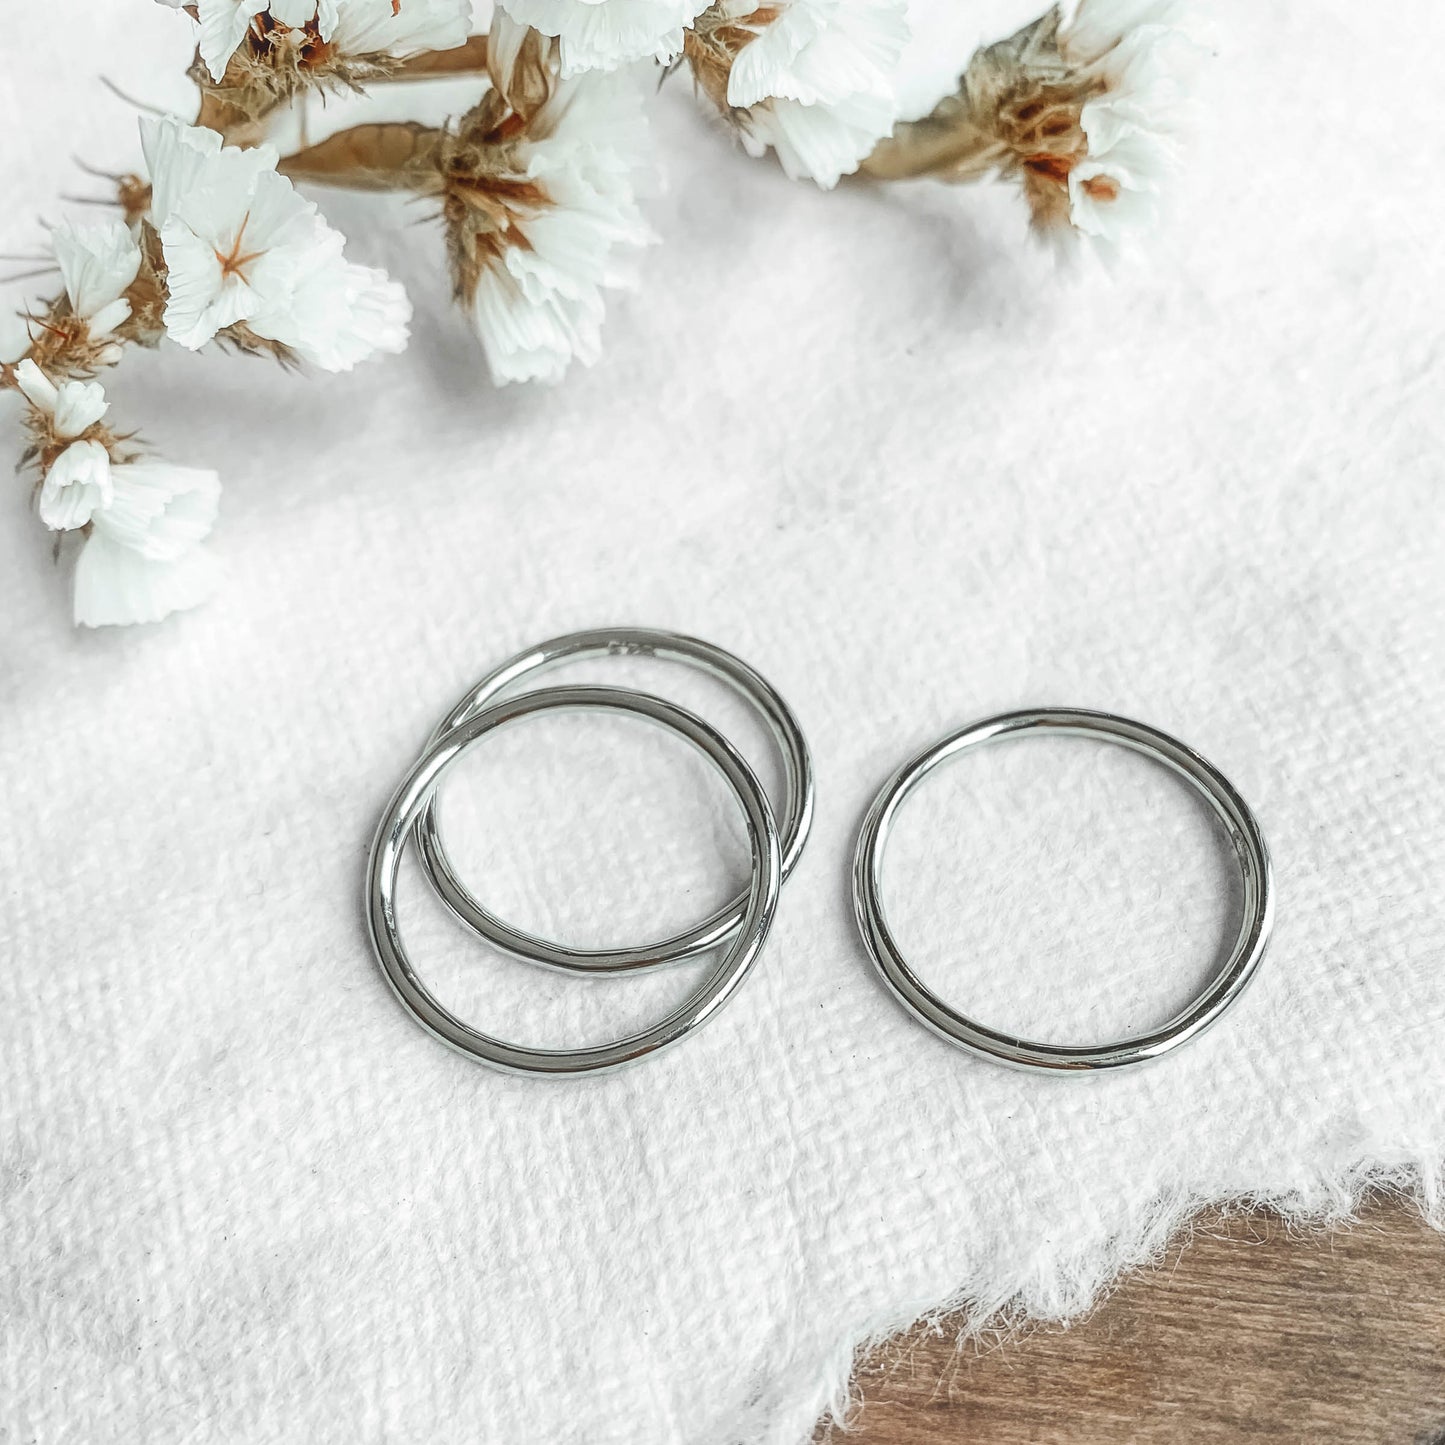 three sterling silver stacking rings on white paper